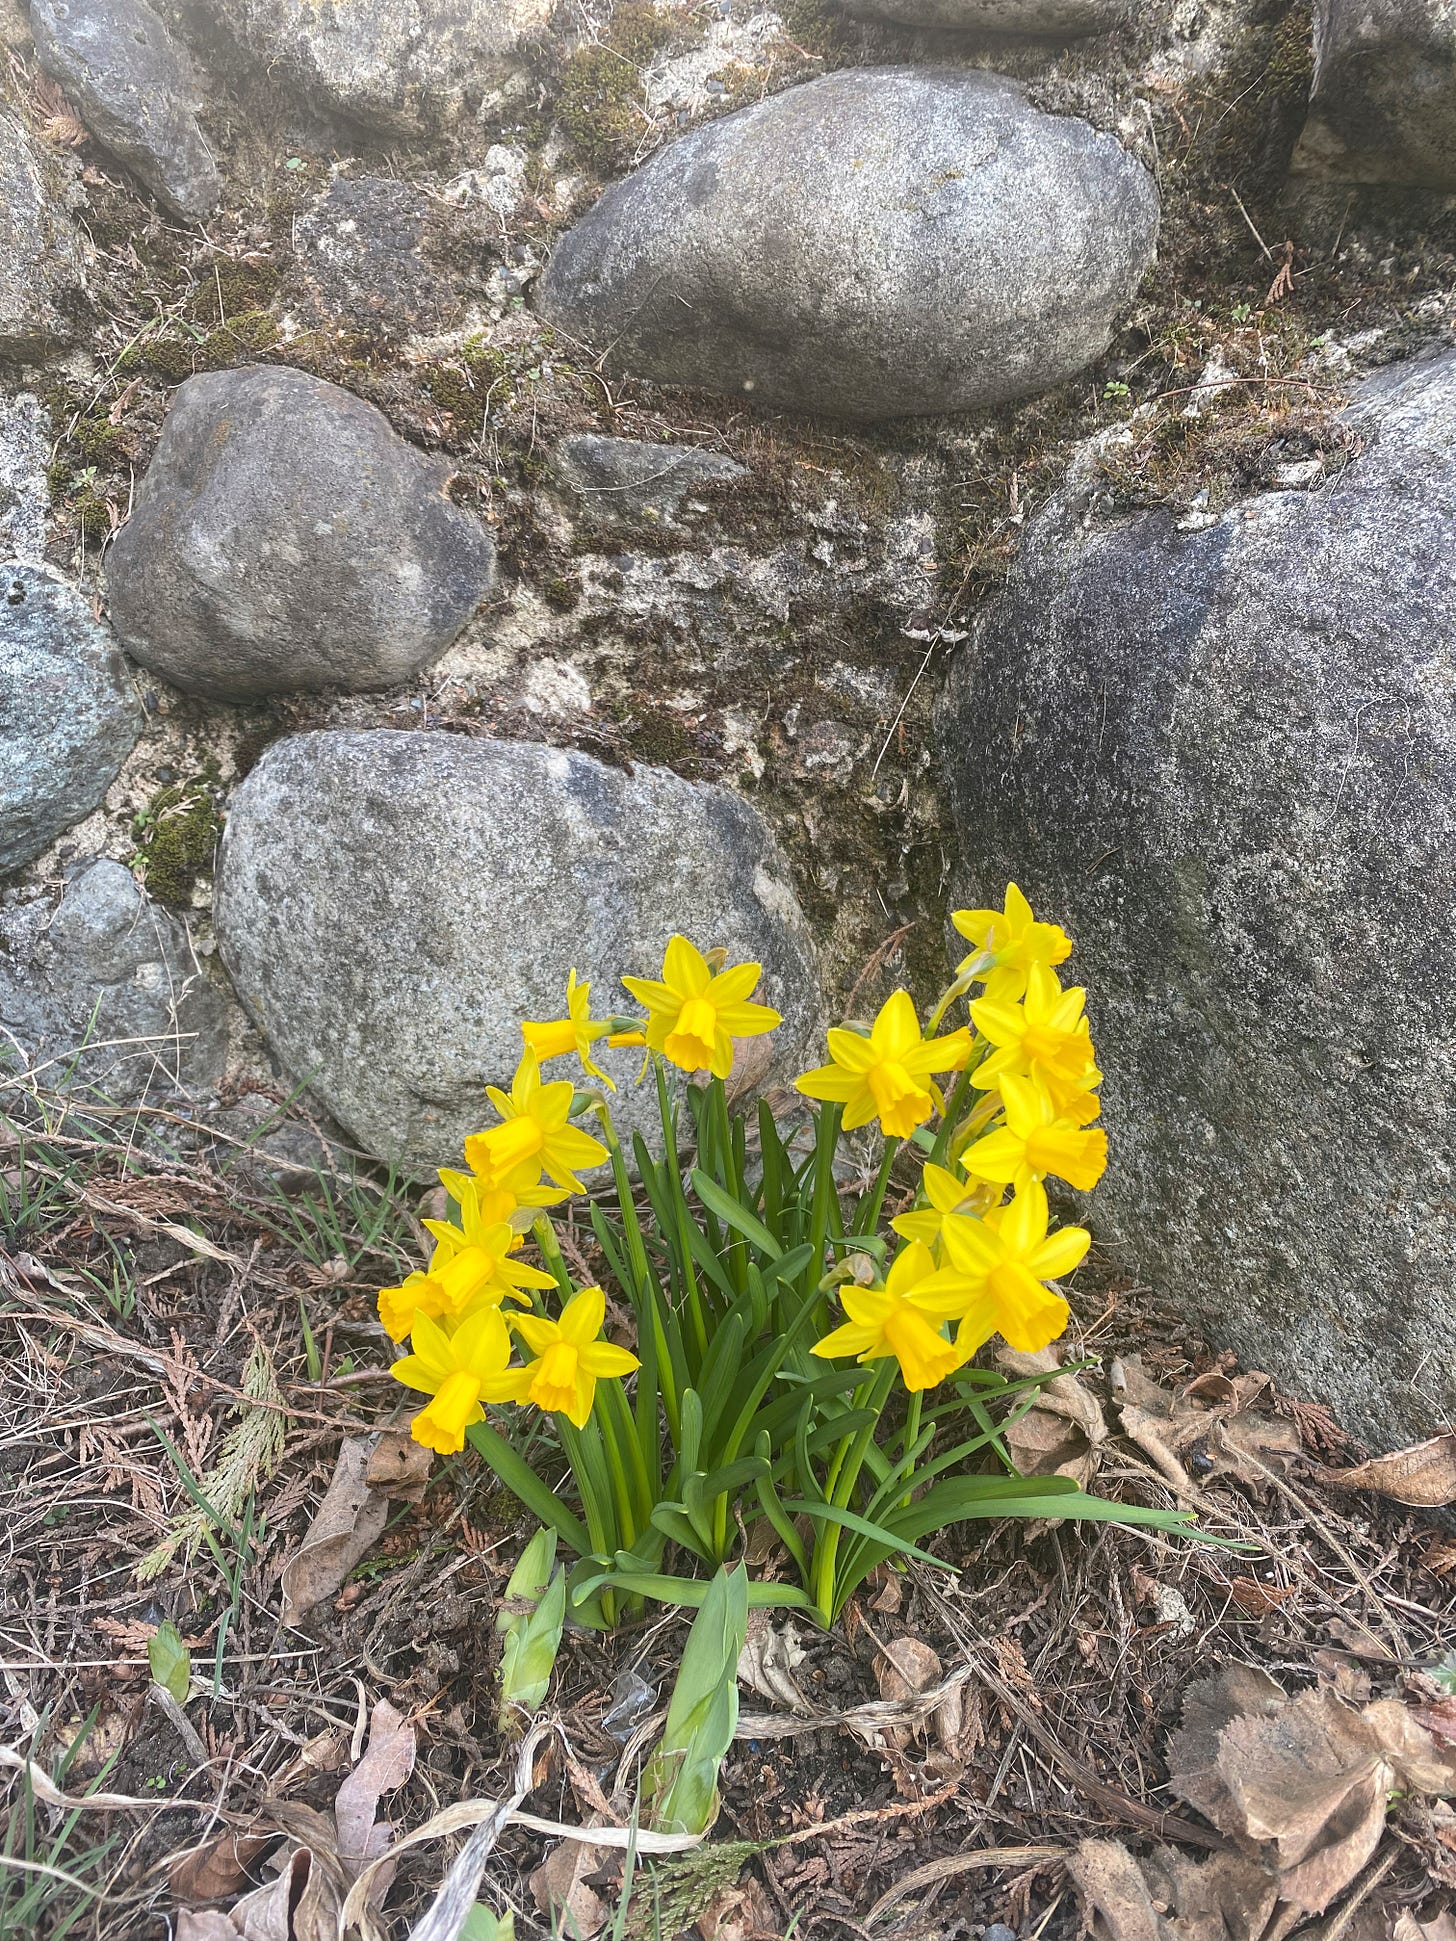 A growth of daffodils in a garden laden with dead leaves. There is a rock wall behind it.